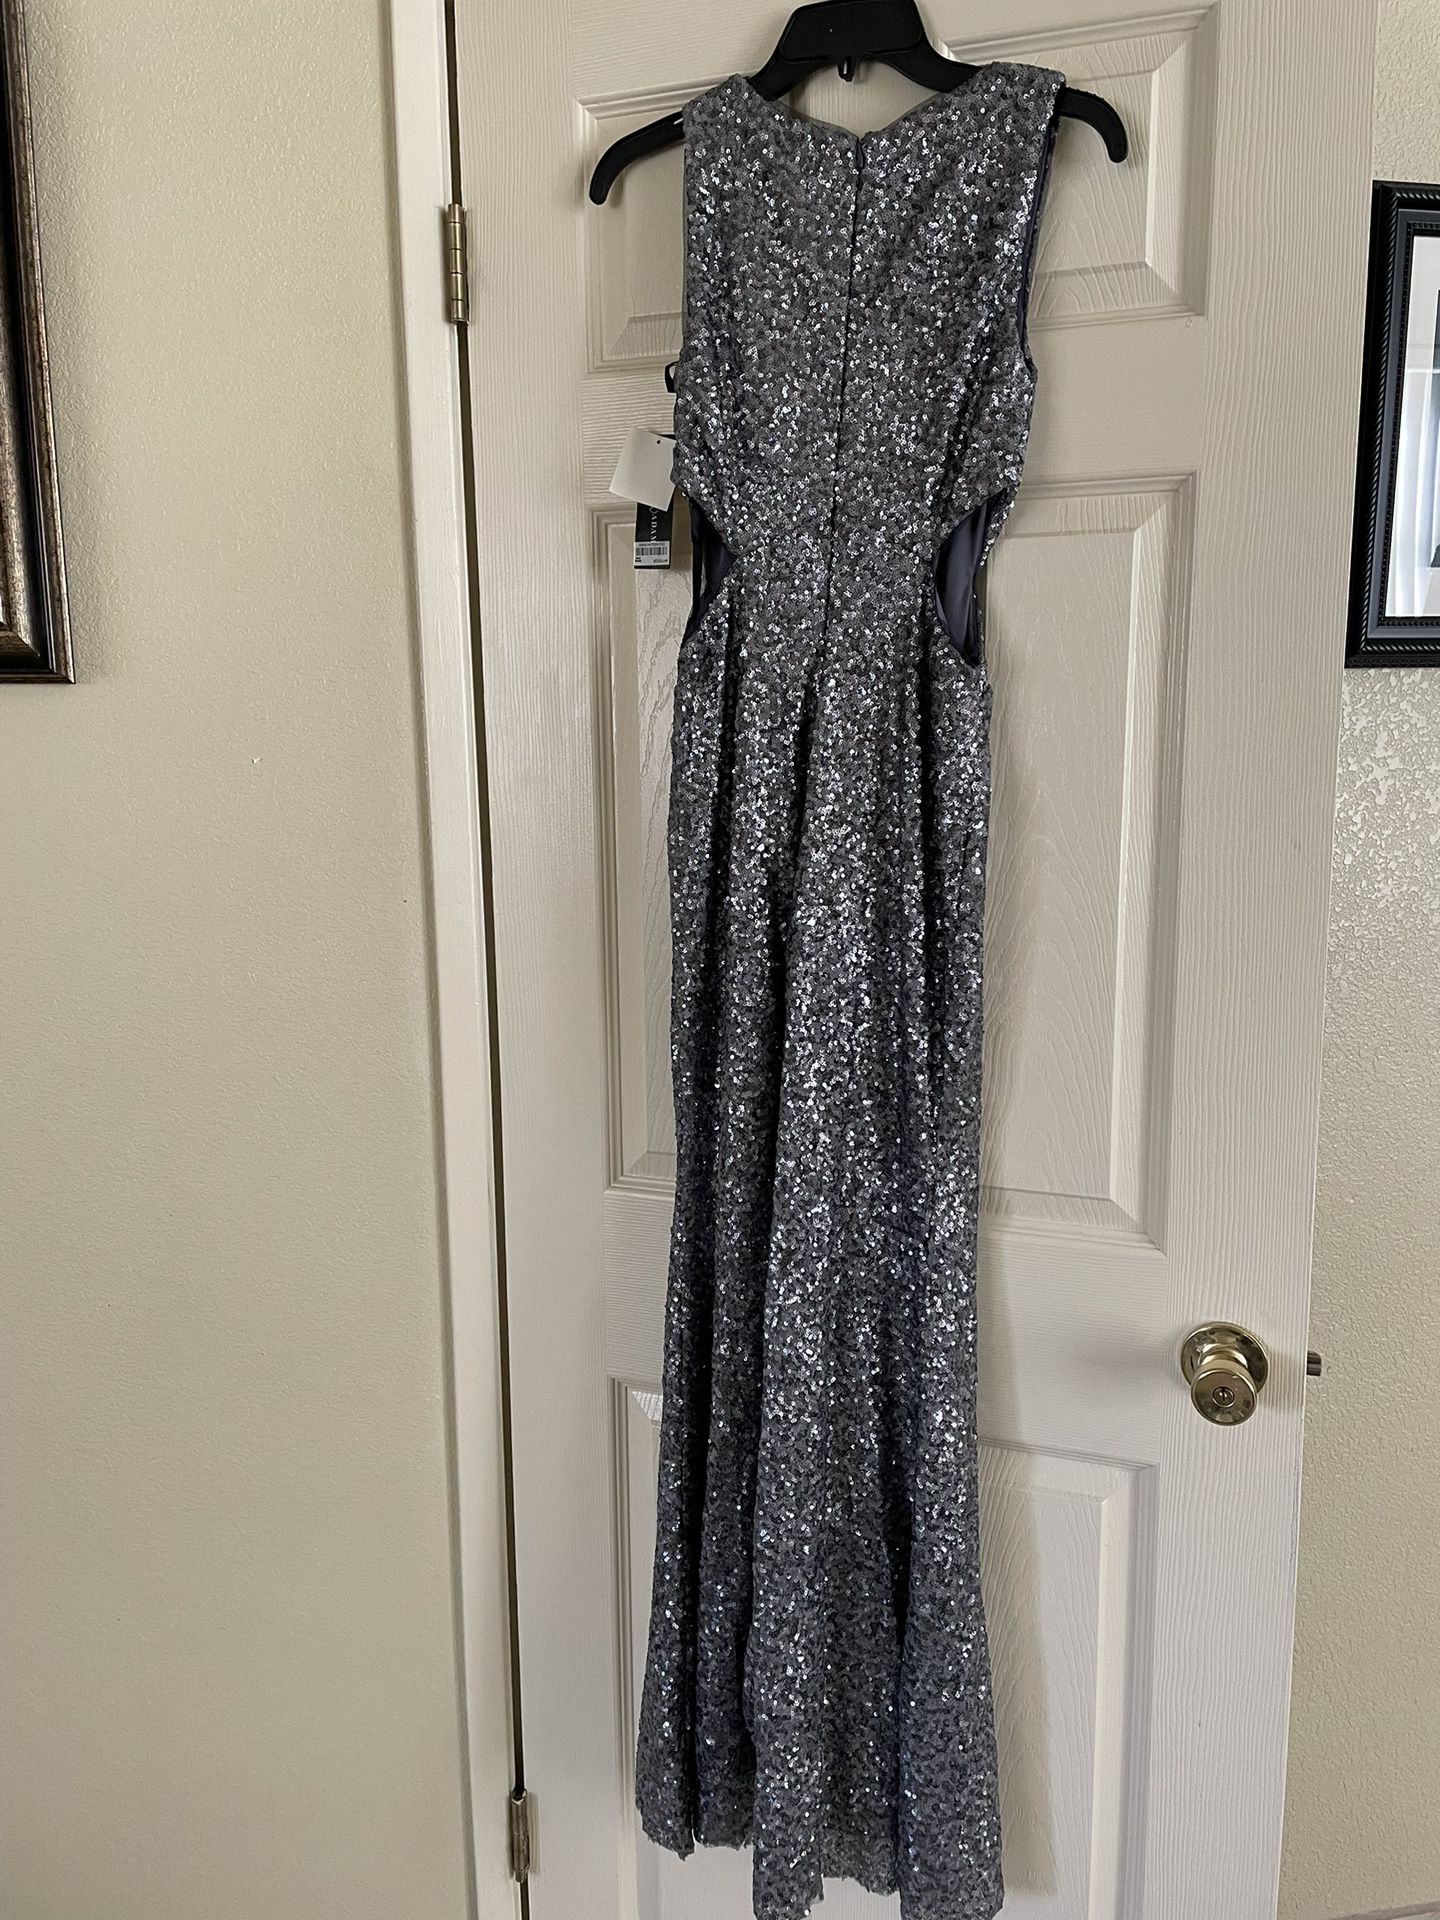 Dress For Sale Size 4